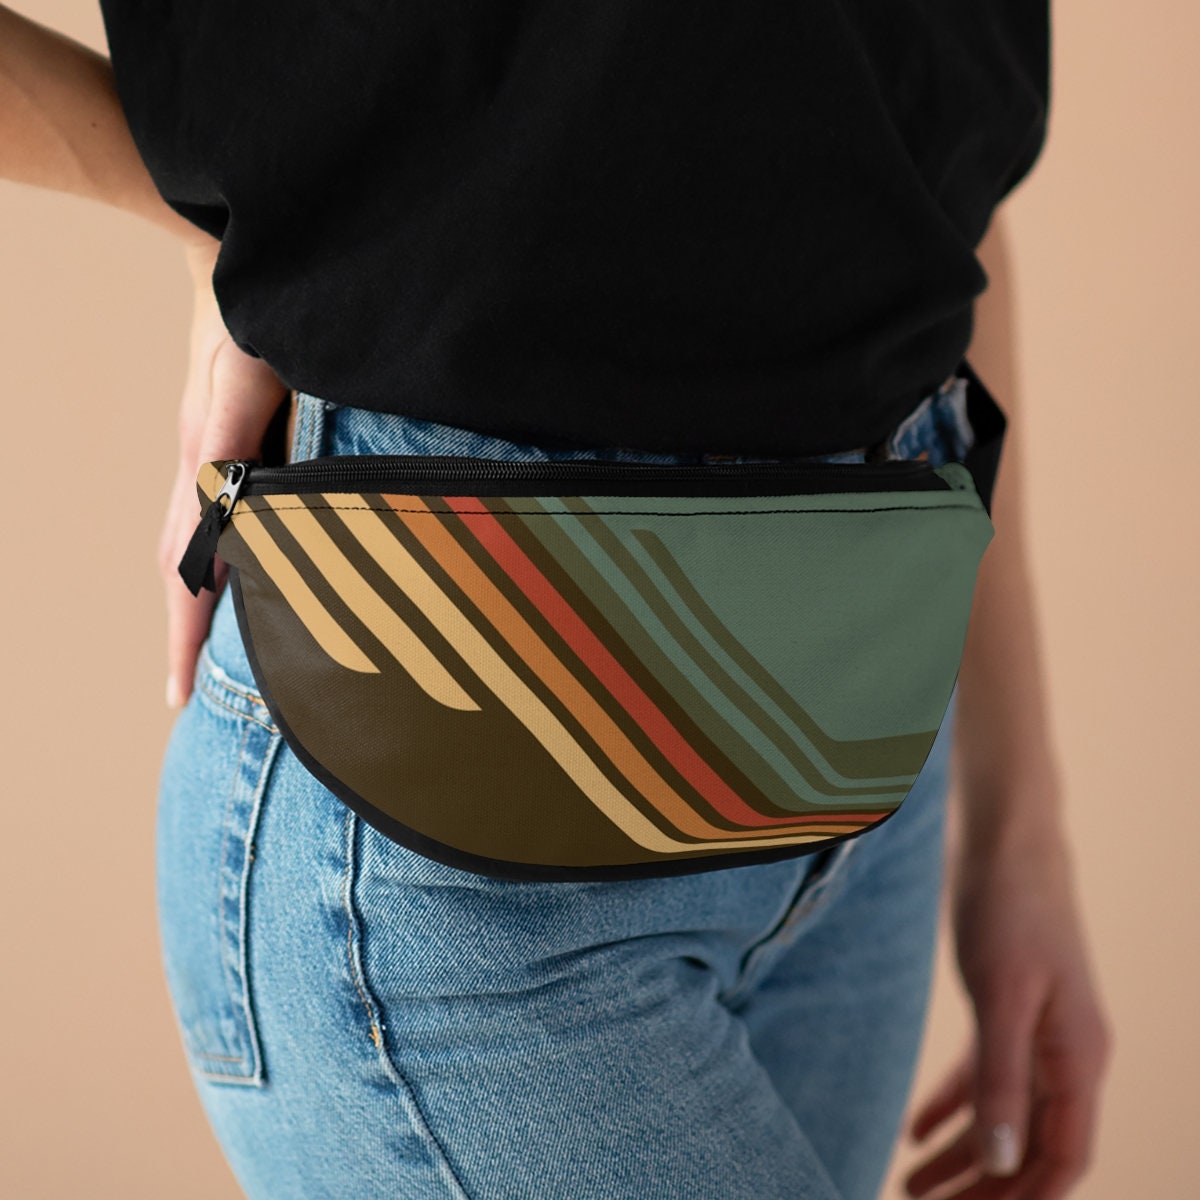 Retro Fanny Pack, Retro 70s style, 70s Graphic Design Fanny Pack, Small Waist Bag, Vintage Inspired Bag, Retro 80s, 70s Stripe Fanny Pack